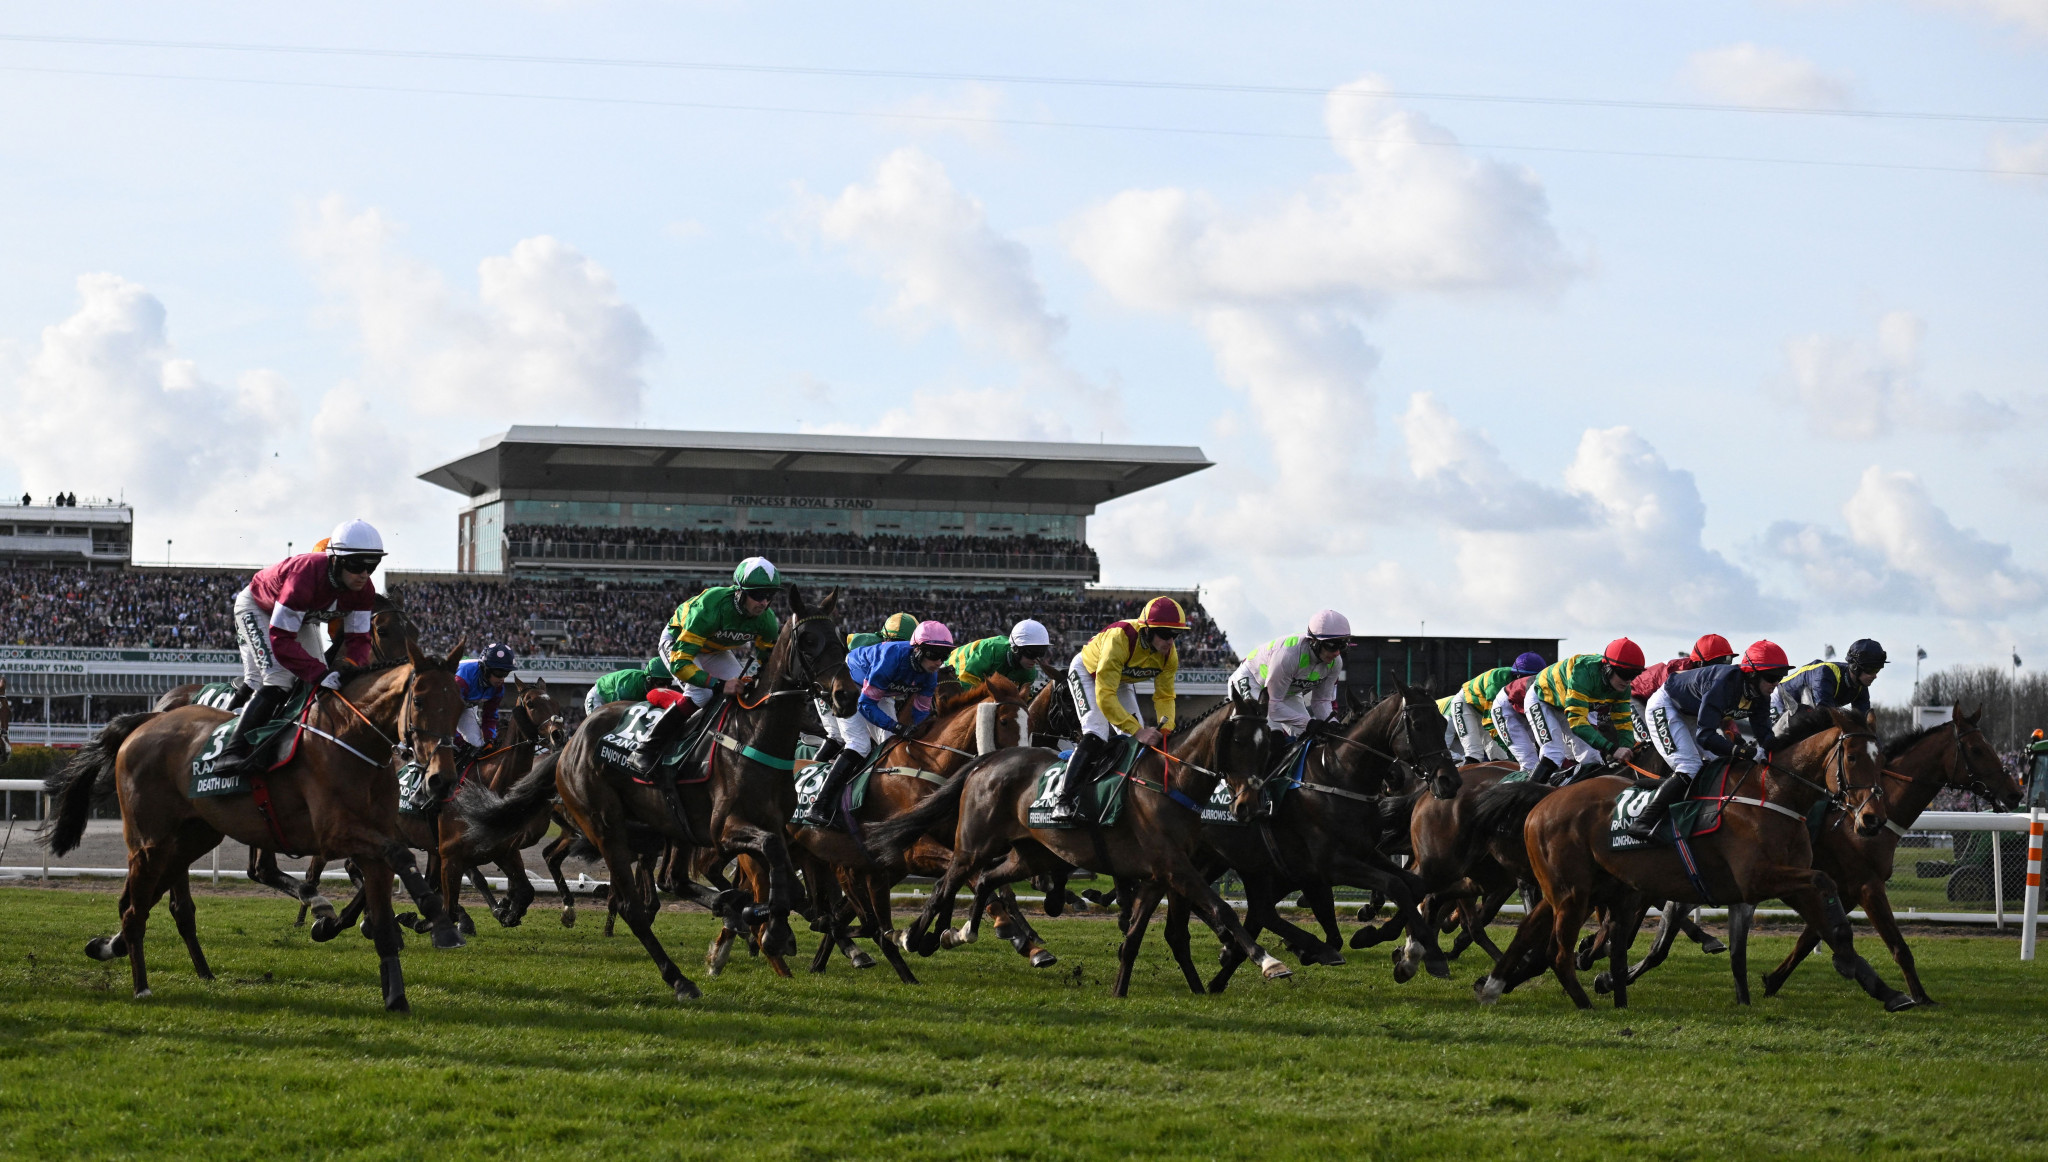 This year's Grand National took place yesterday at Aintree Racecourse ©Getty Images